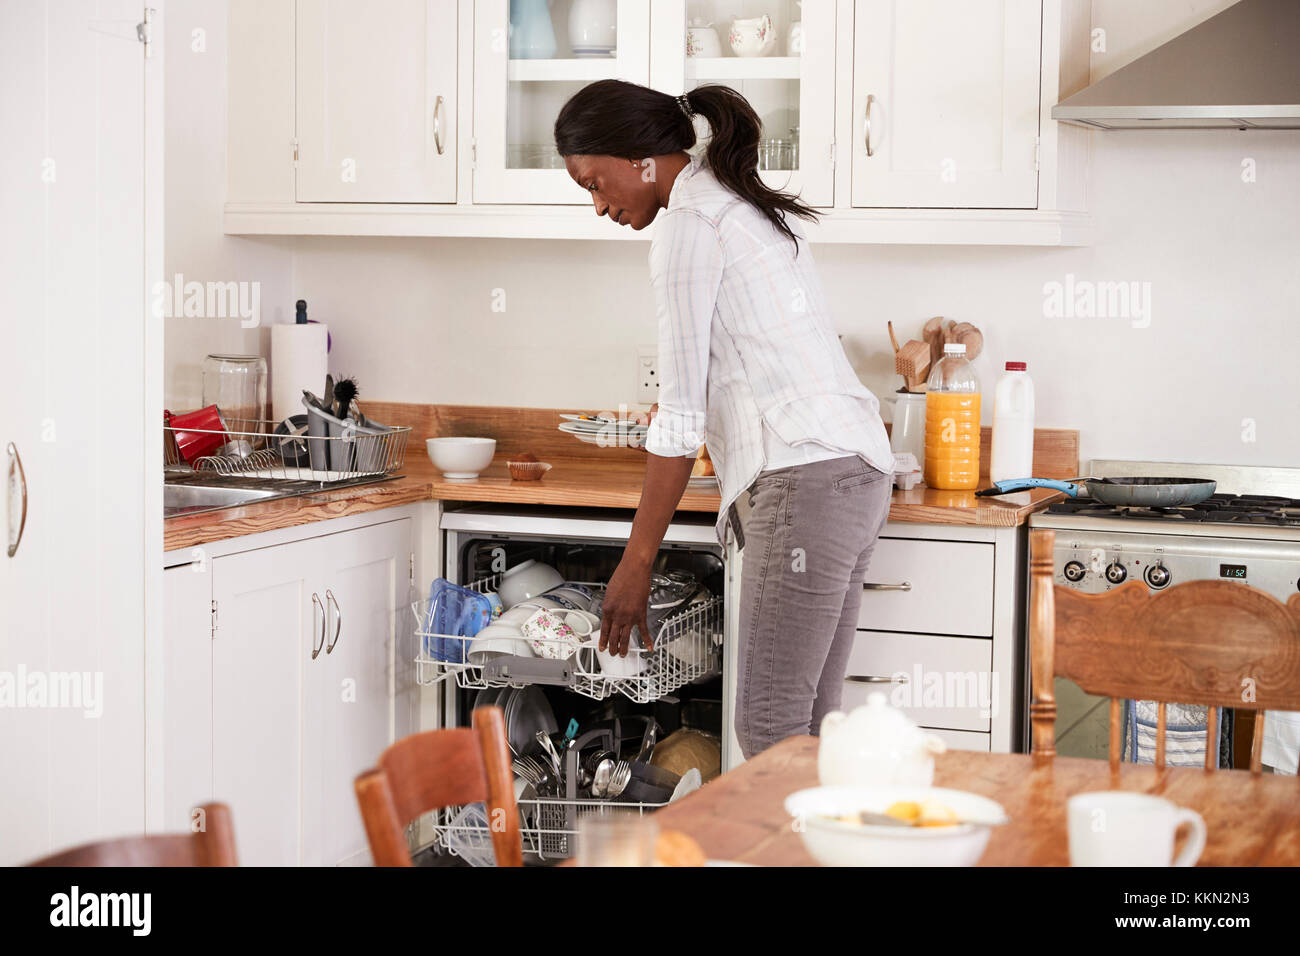 Woman Clearing Breakfast Table And Loading Dishwasher Stock Photo